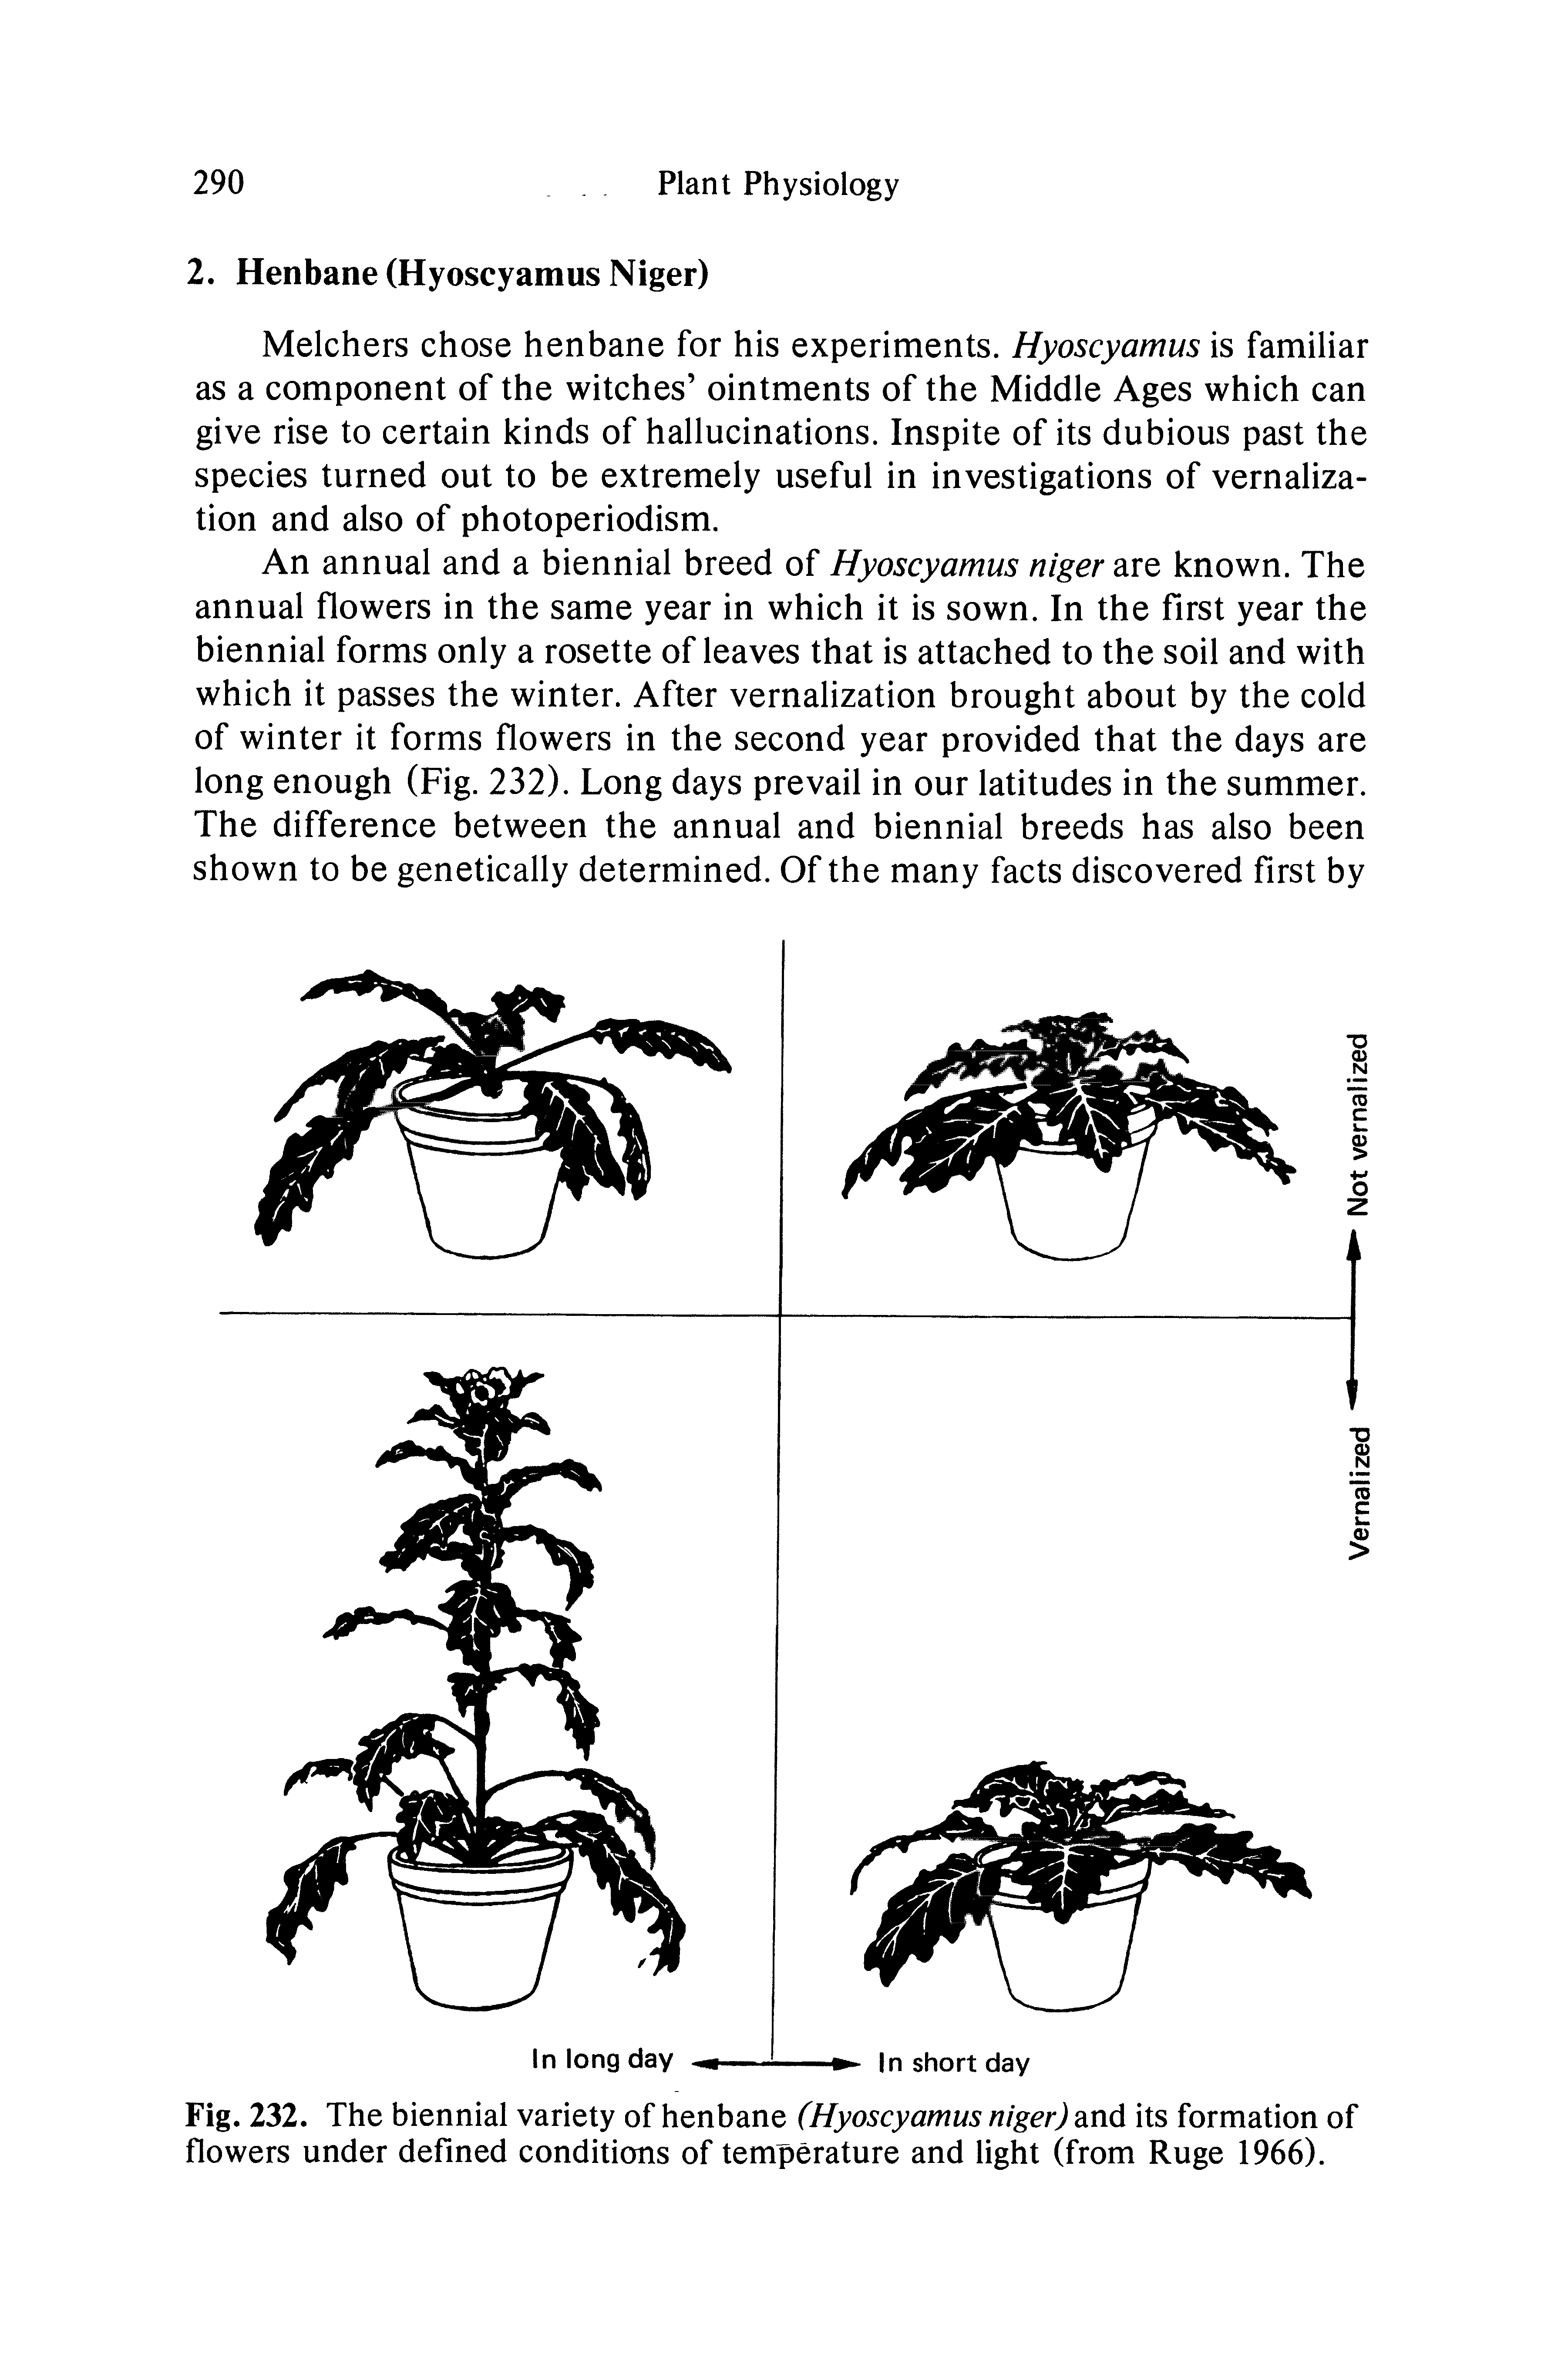 Fig. 232. The biennial variety of henbane (Hyoscyamus niger) md its formation of flowers under defined conditions of temperature and light (from Ruge 1966).